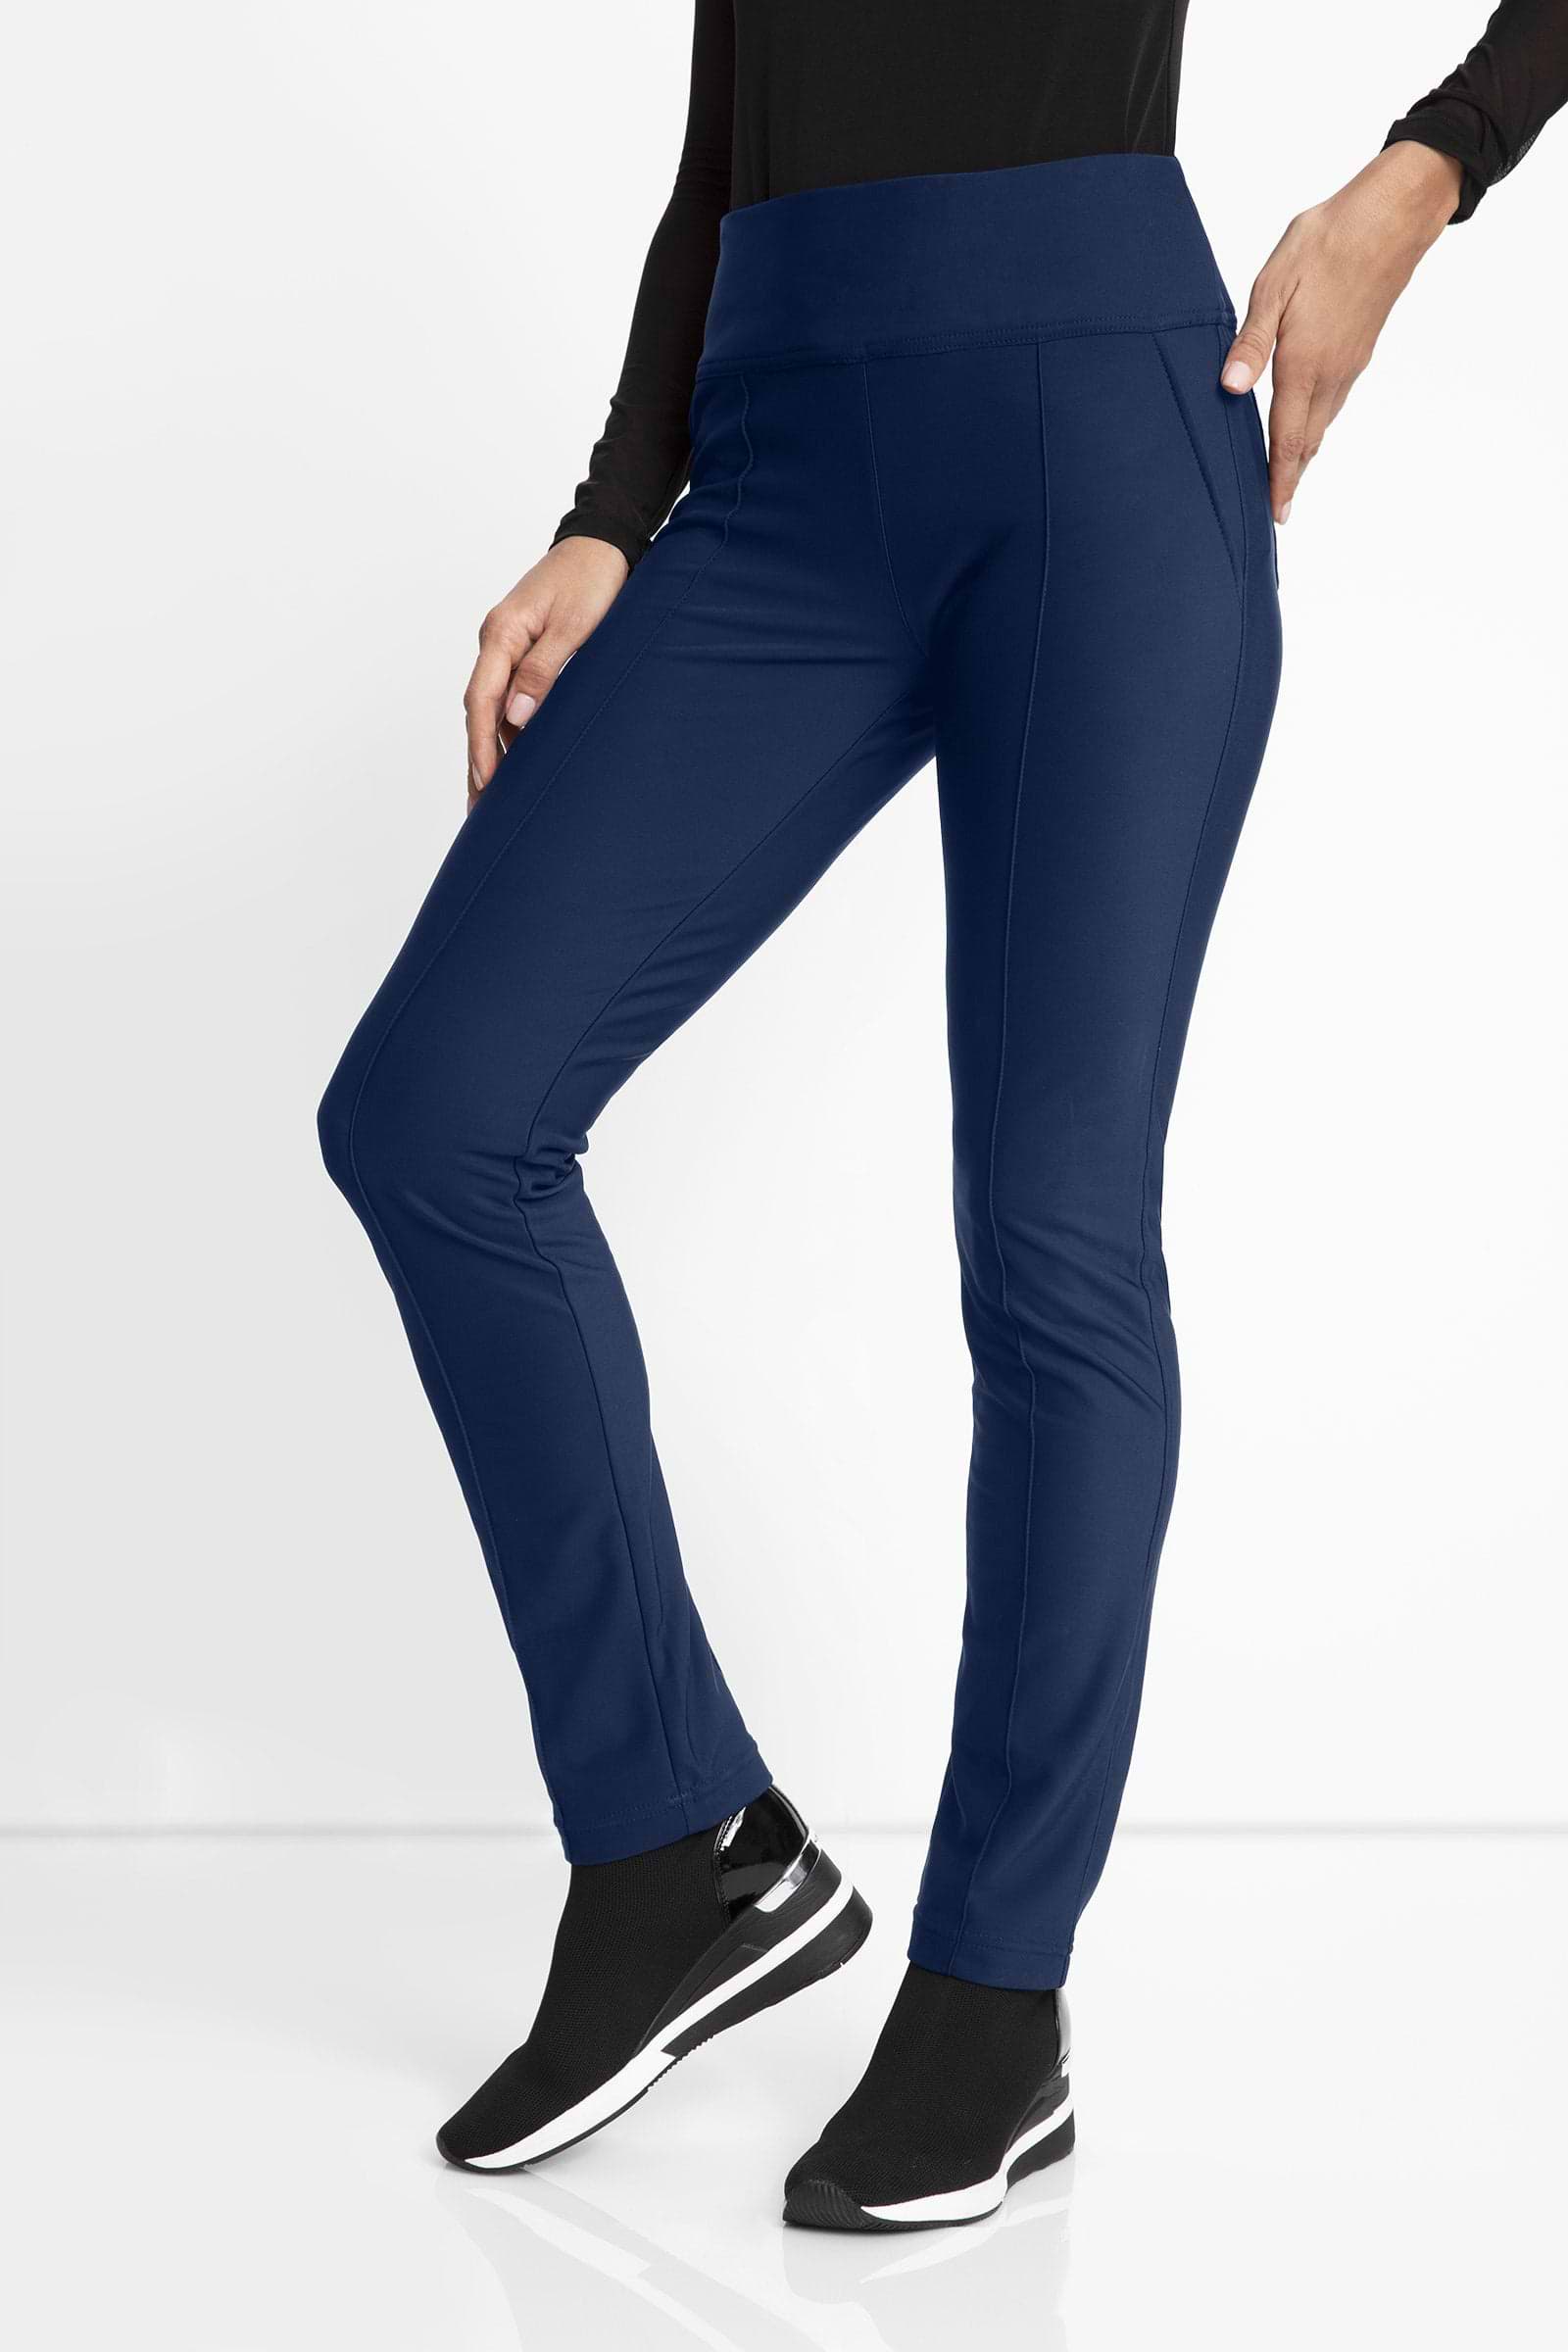 Leather Fleeced-Line Legging, SoftShell Clothes